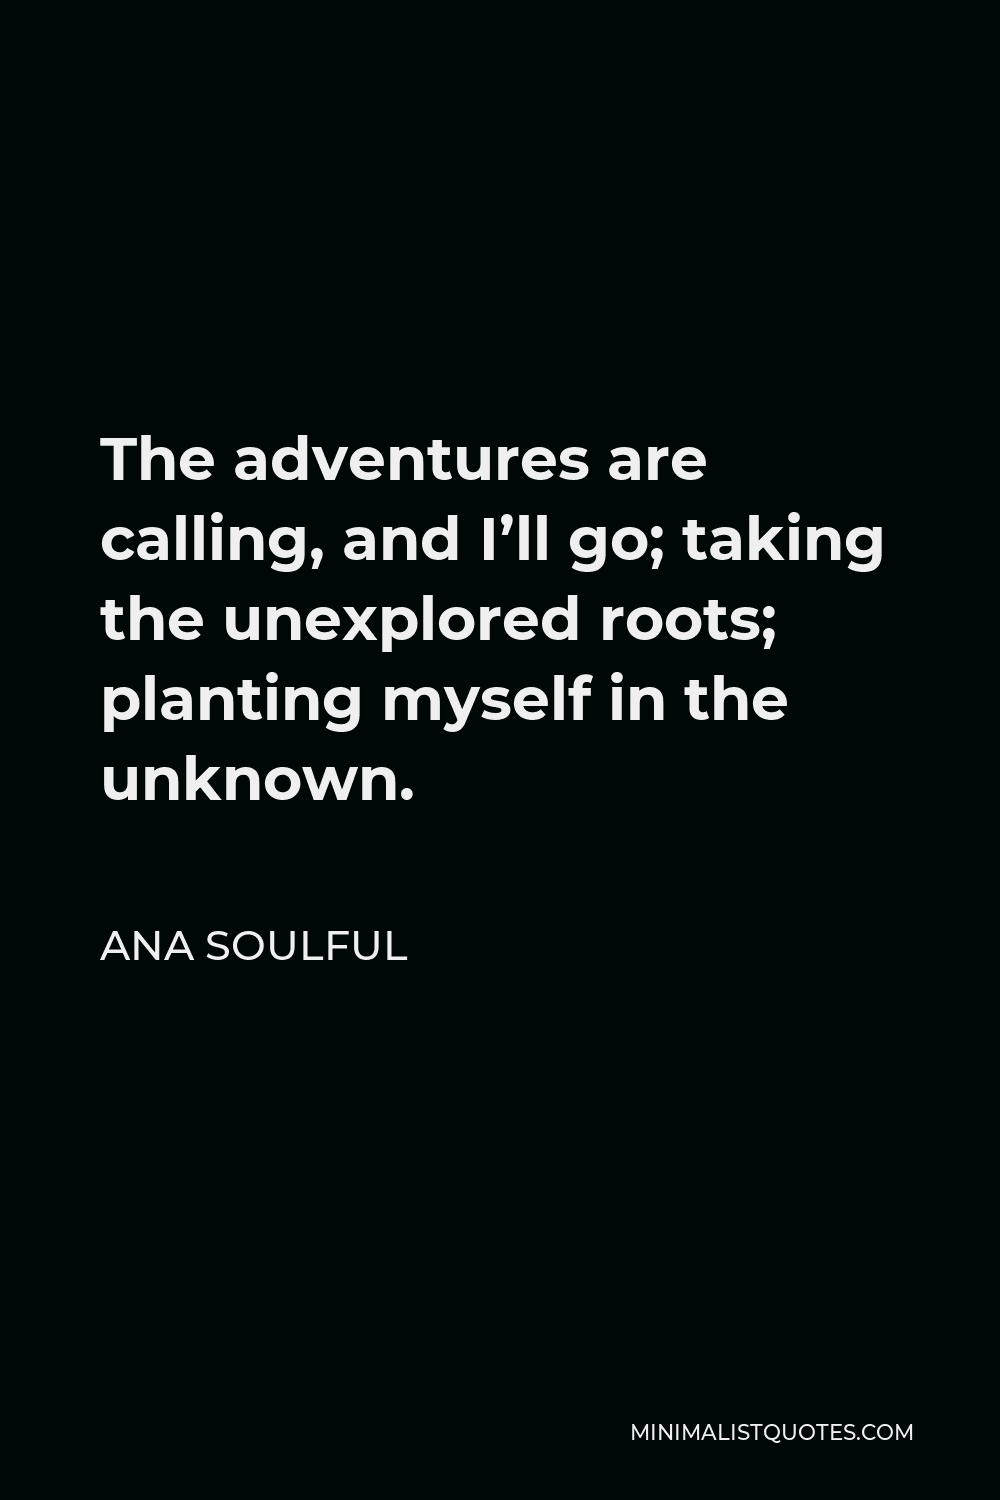 Ana Soulful Quote - The adventures are calling, and I’ll go; taking the unexplored roots; planting myself in the unknown.